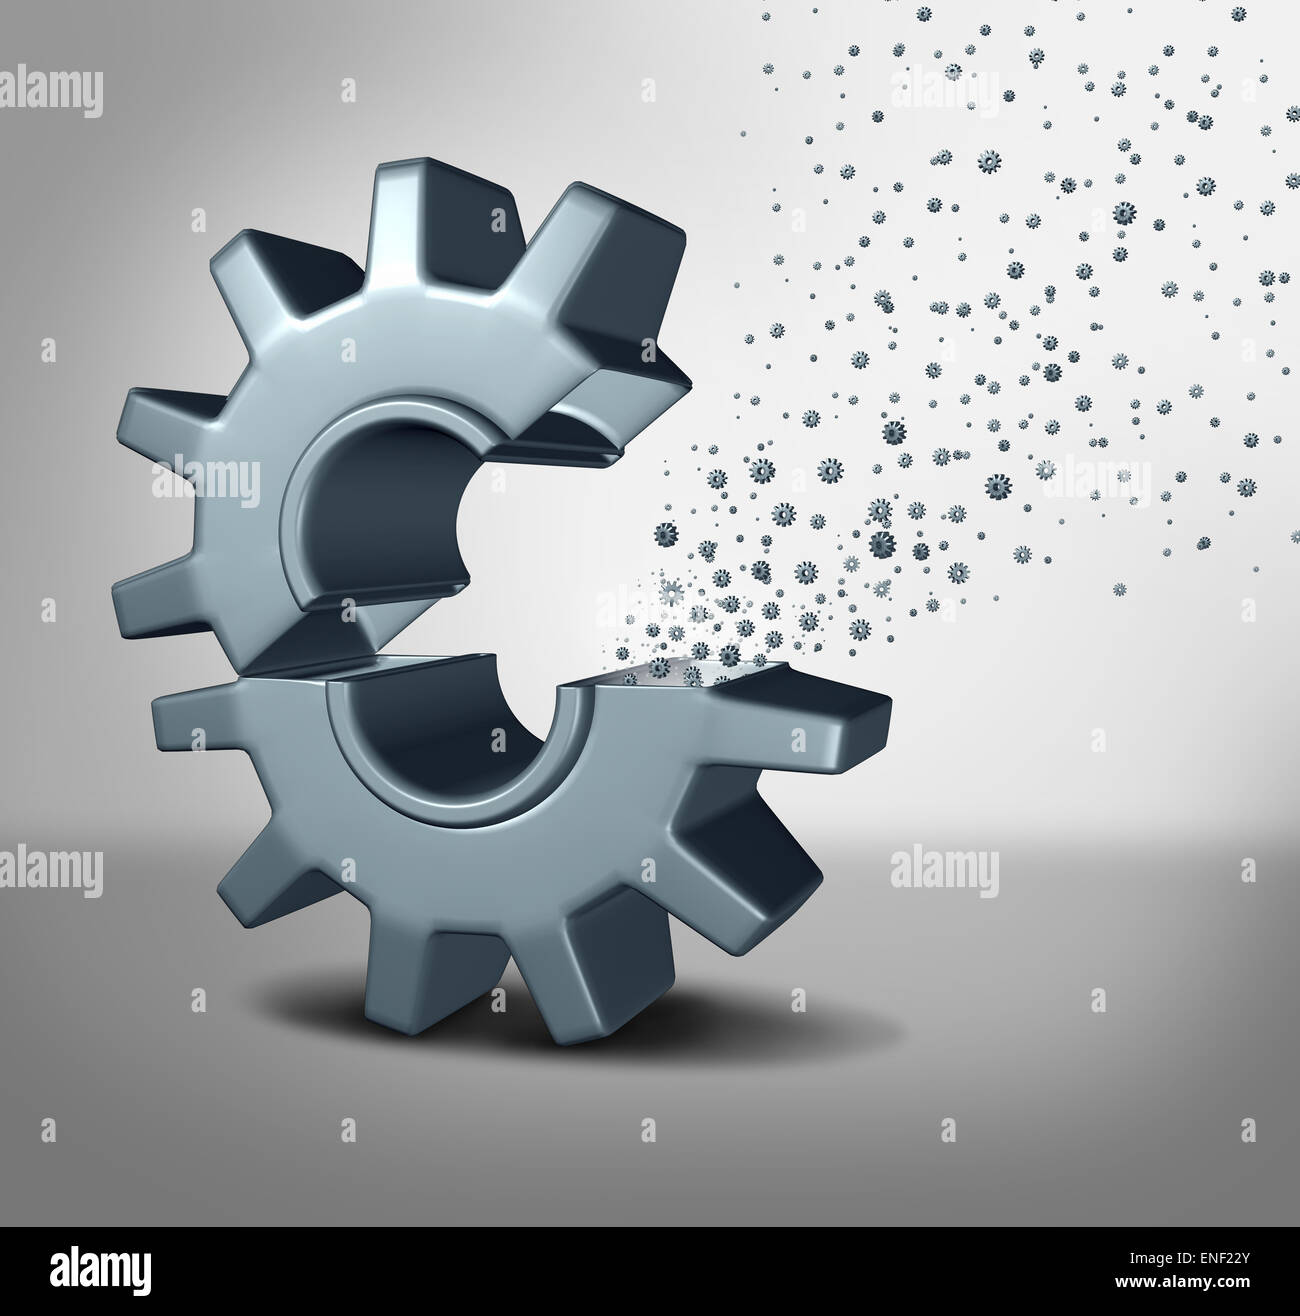 Nanotechnology concept or nanotech symbol of advanced molecular and supramolecular technology as a single open machine gear with miniature microscopic cog wheels spreading out as a scientific metaphor for the future of robotics. Stock Photo